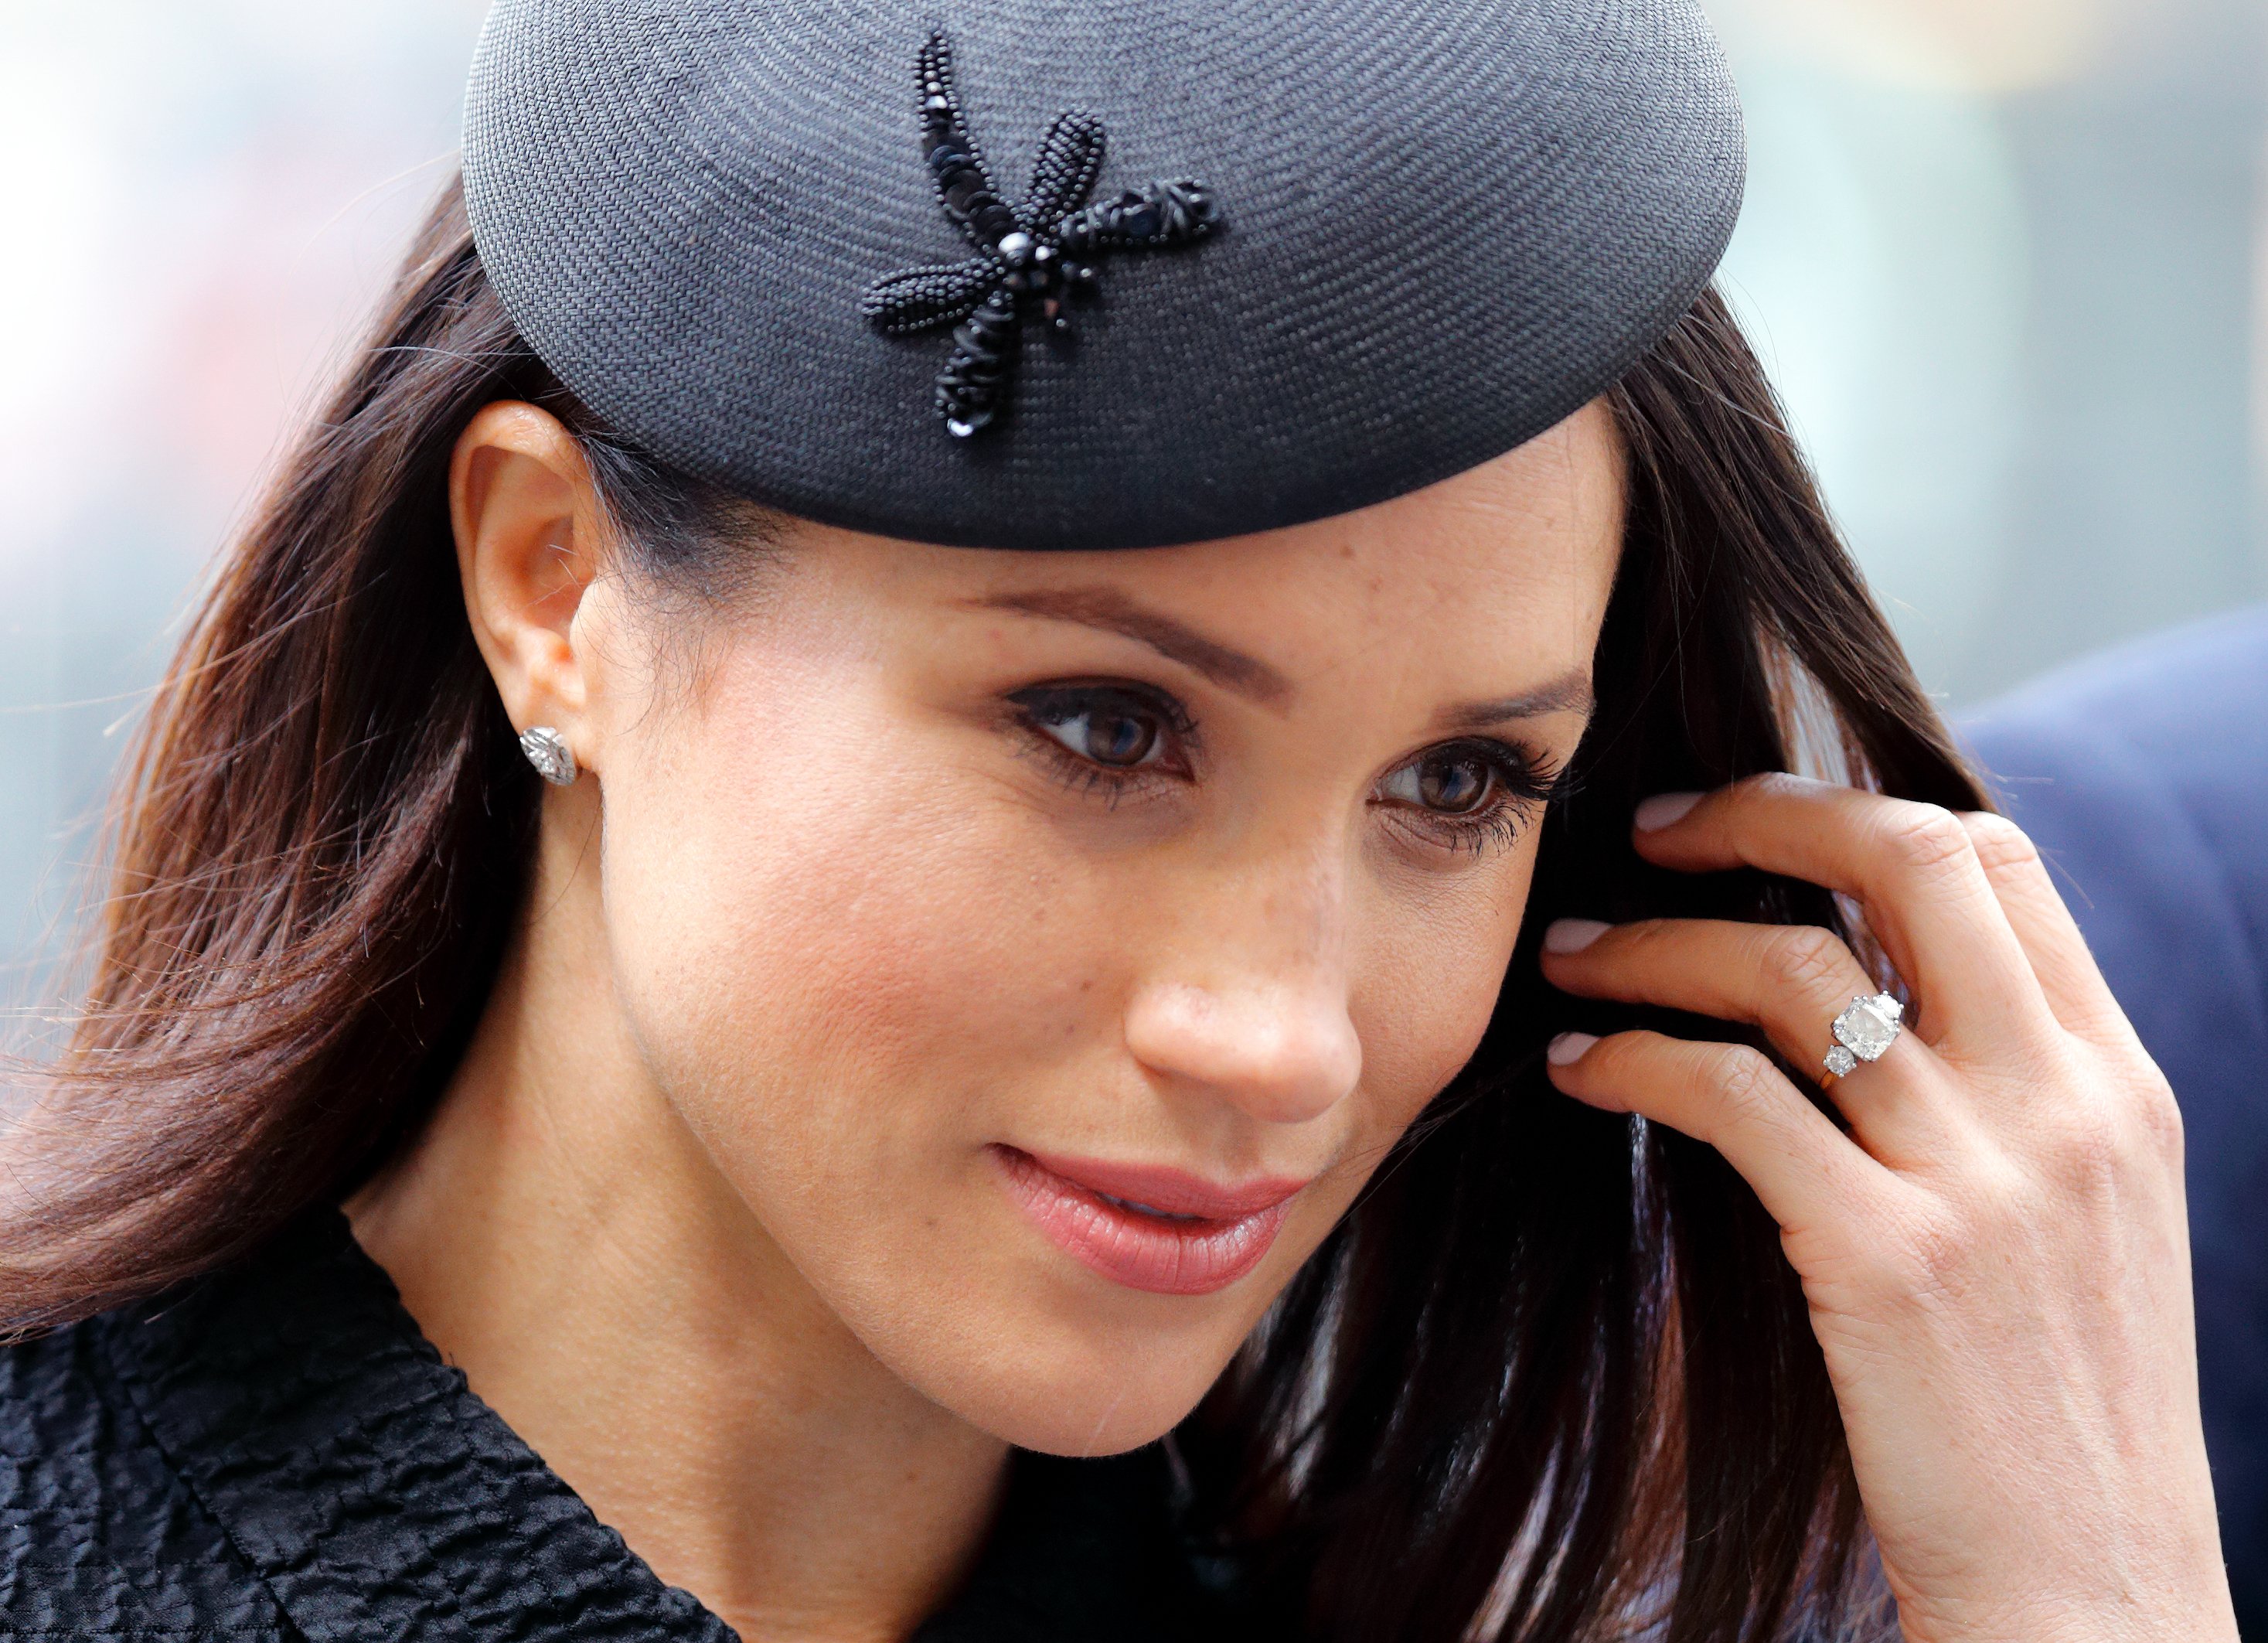 Meghan Markle attends an Anzac Day Service of Commemoration and Thanksgiving at Westminster Abbey on April 25, 2018 in London, England. | Source: Getty Images